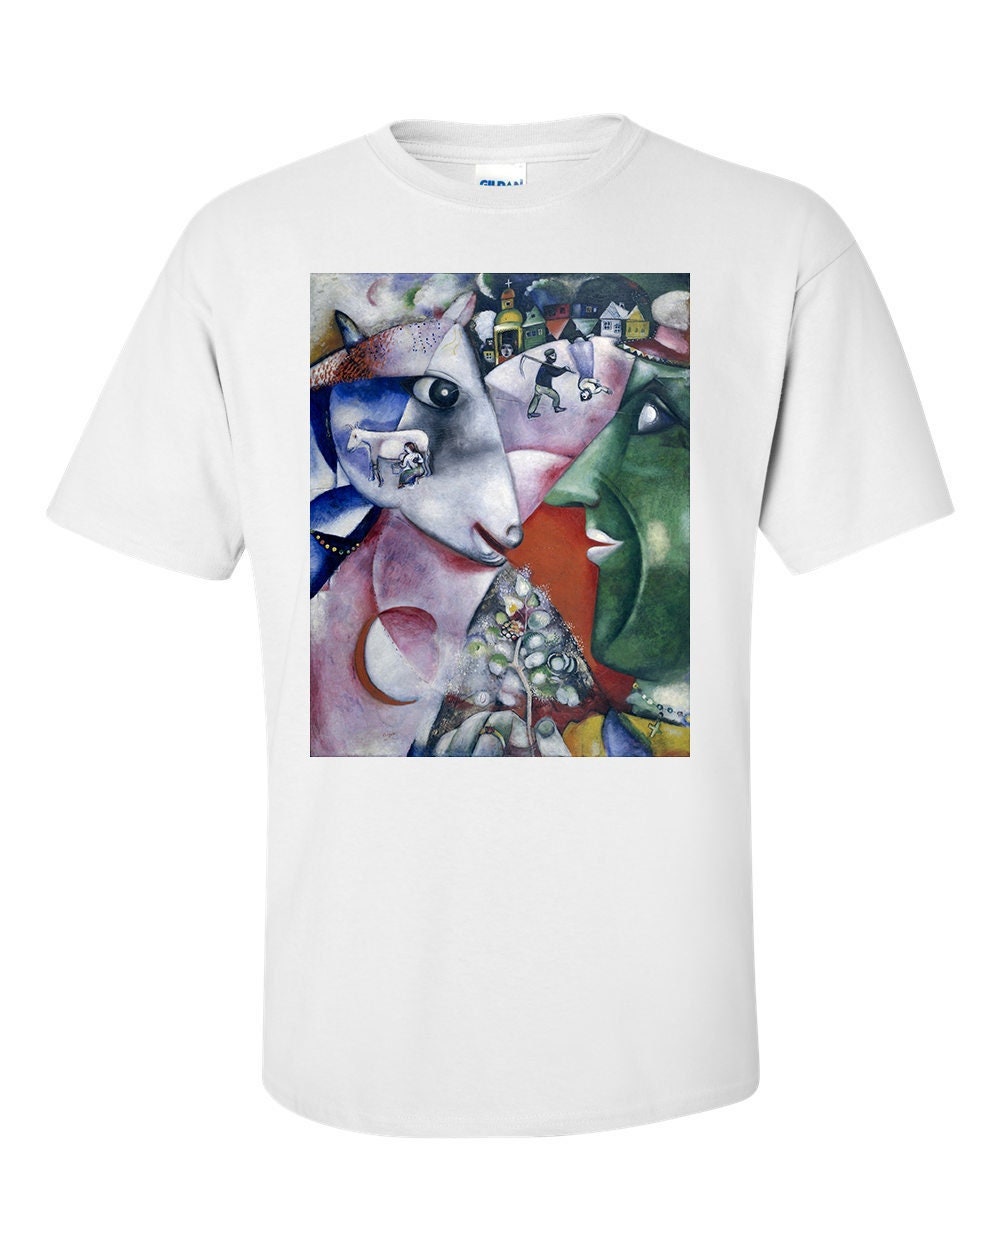 I and the Village Marc Chagall Fine Art T-Shirt